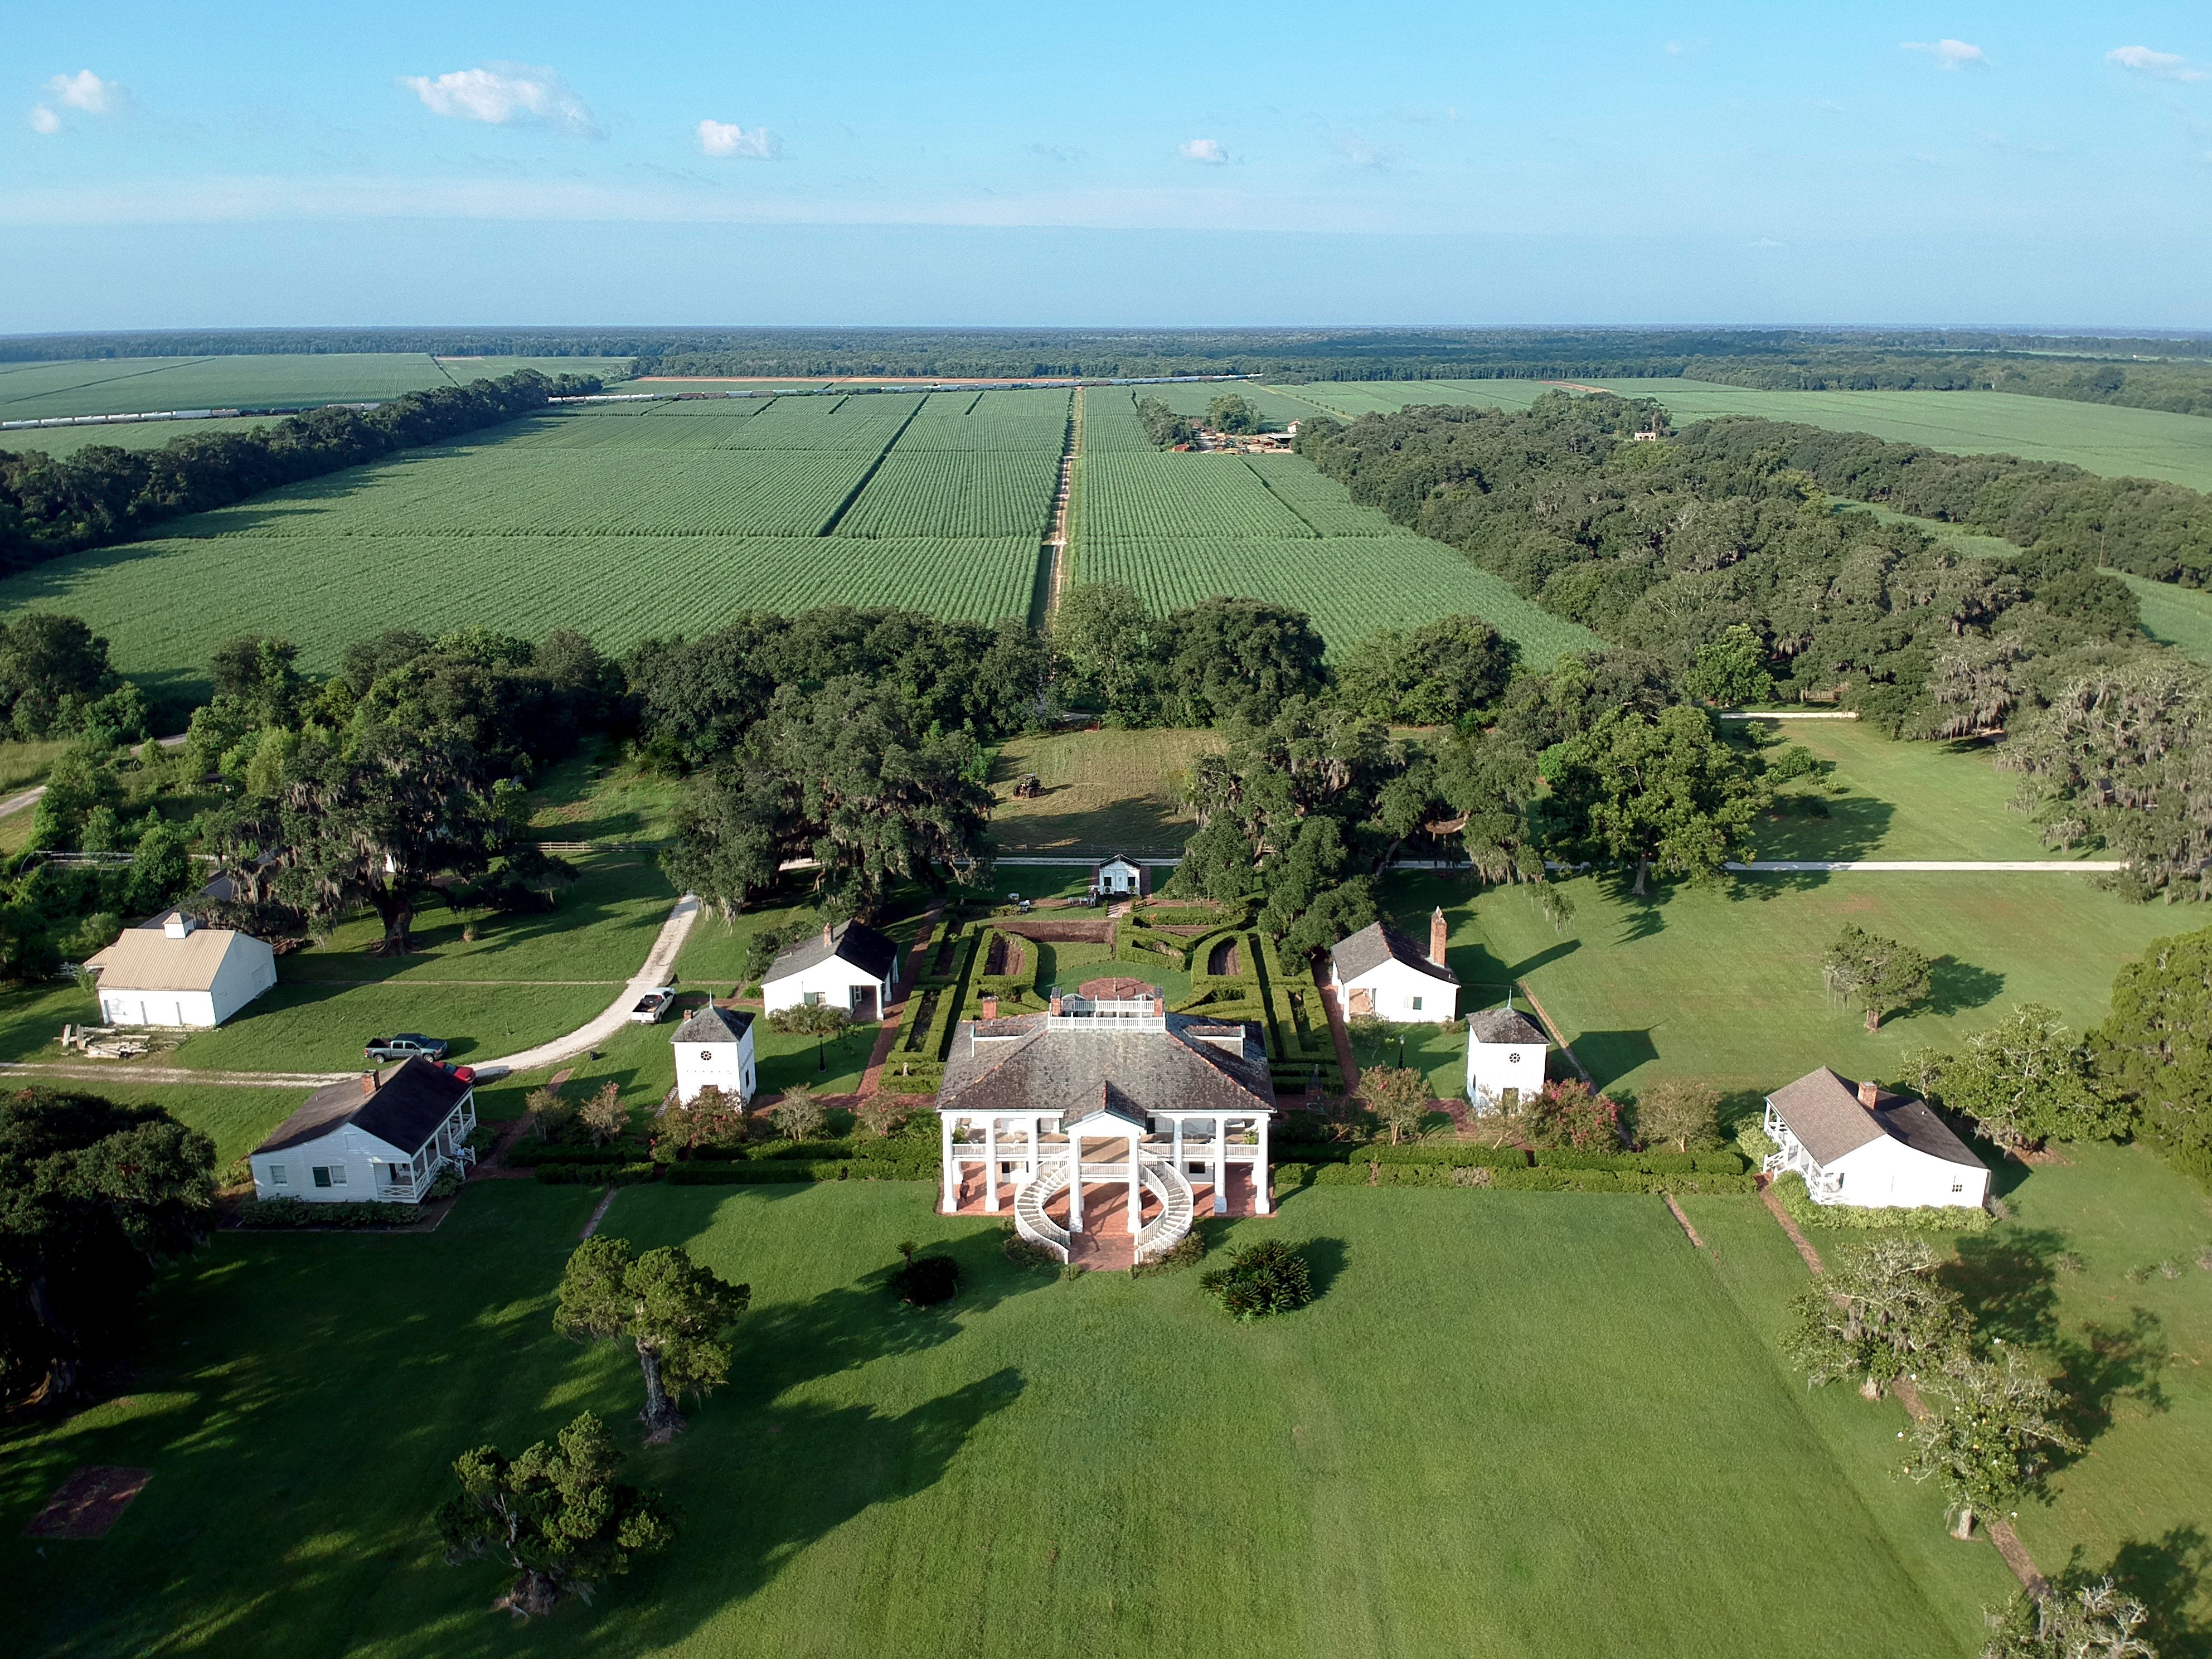 Photo is an aerial view of the west bank of St. John the Baptist Parish. The main house of Evergreen Plantation is in the middle with other buildings scattered around. Trees and rows of crops are in the background.